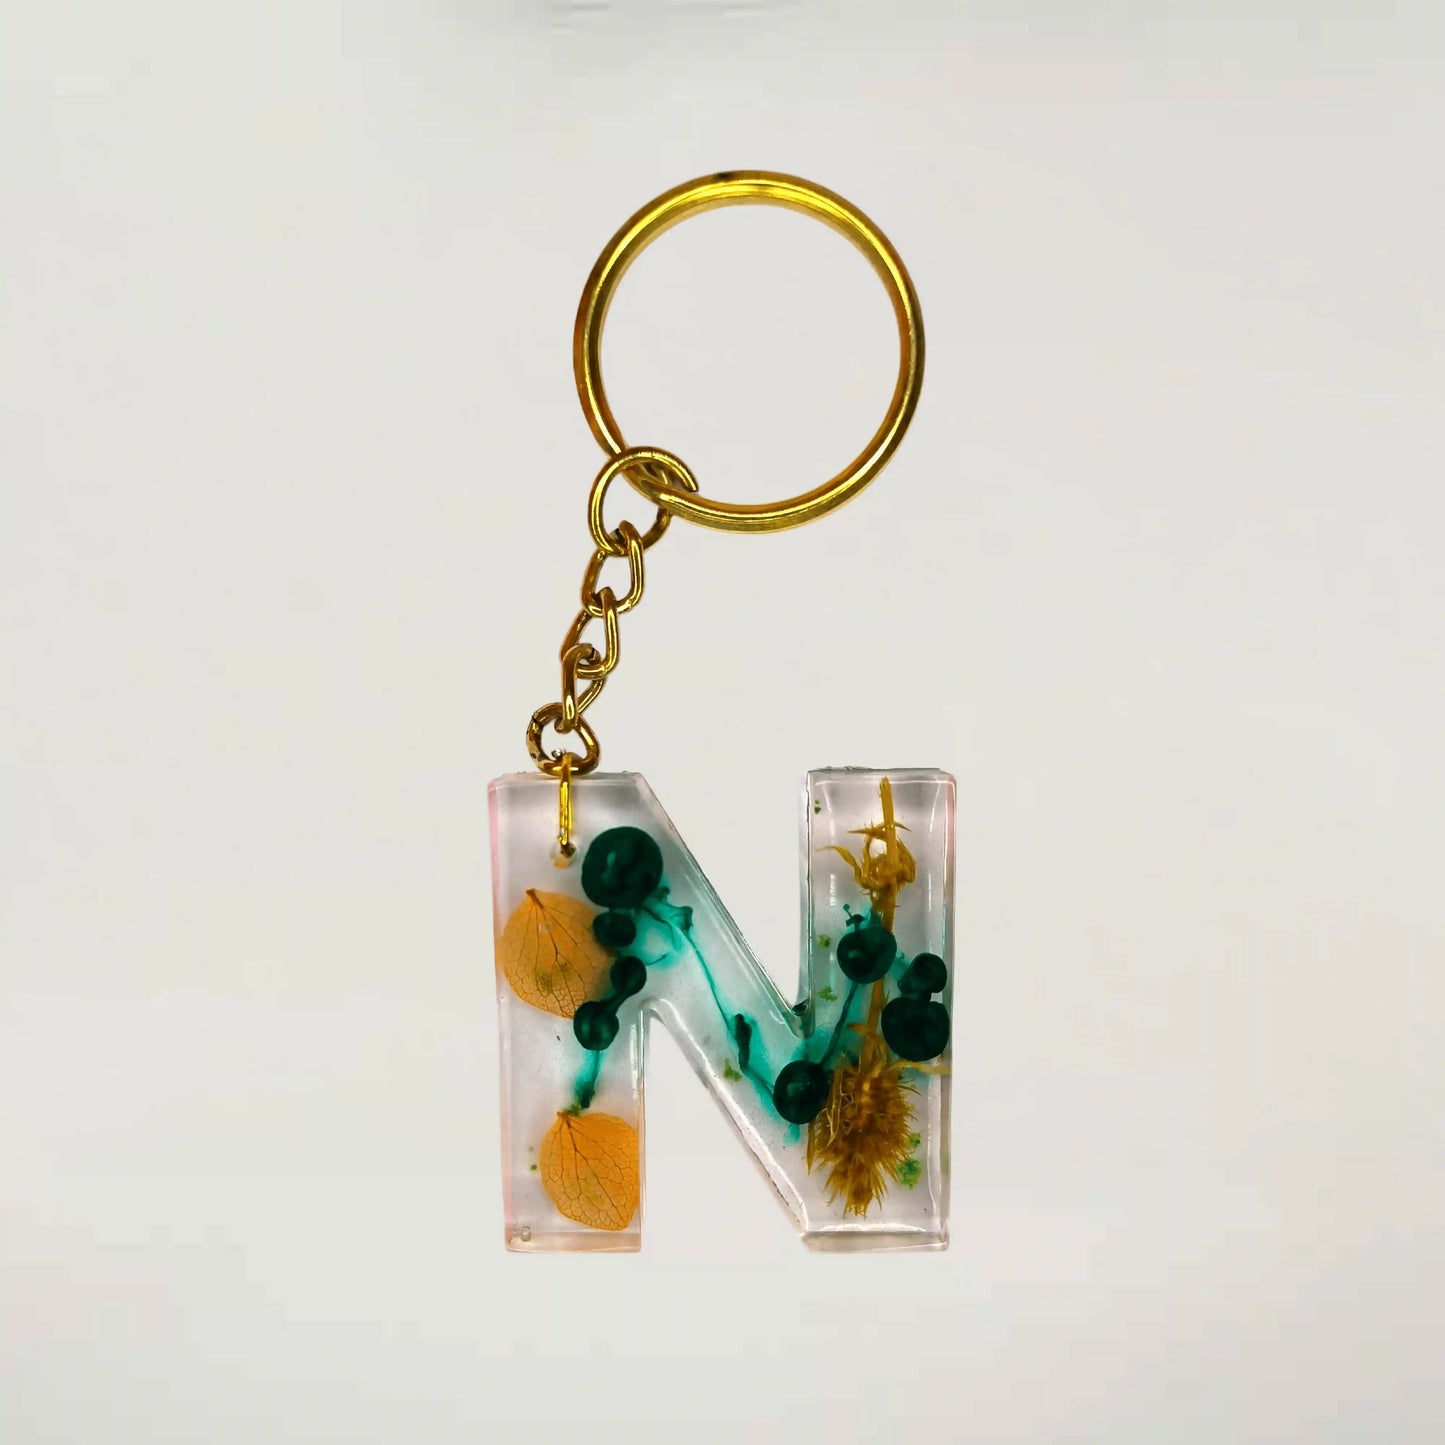 Buy Modern Preserved Flowers Resin Keychains With Customizable Monogram For Men and Women